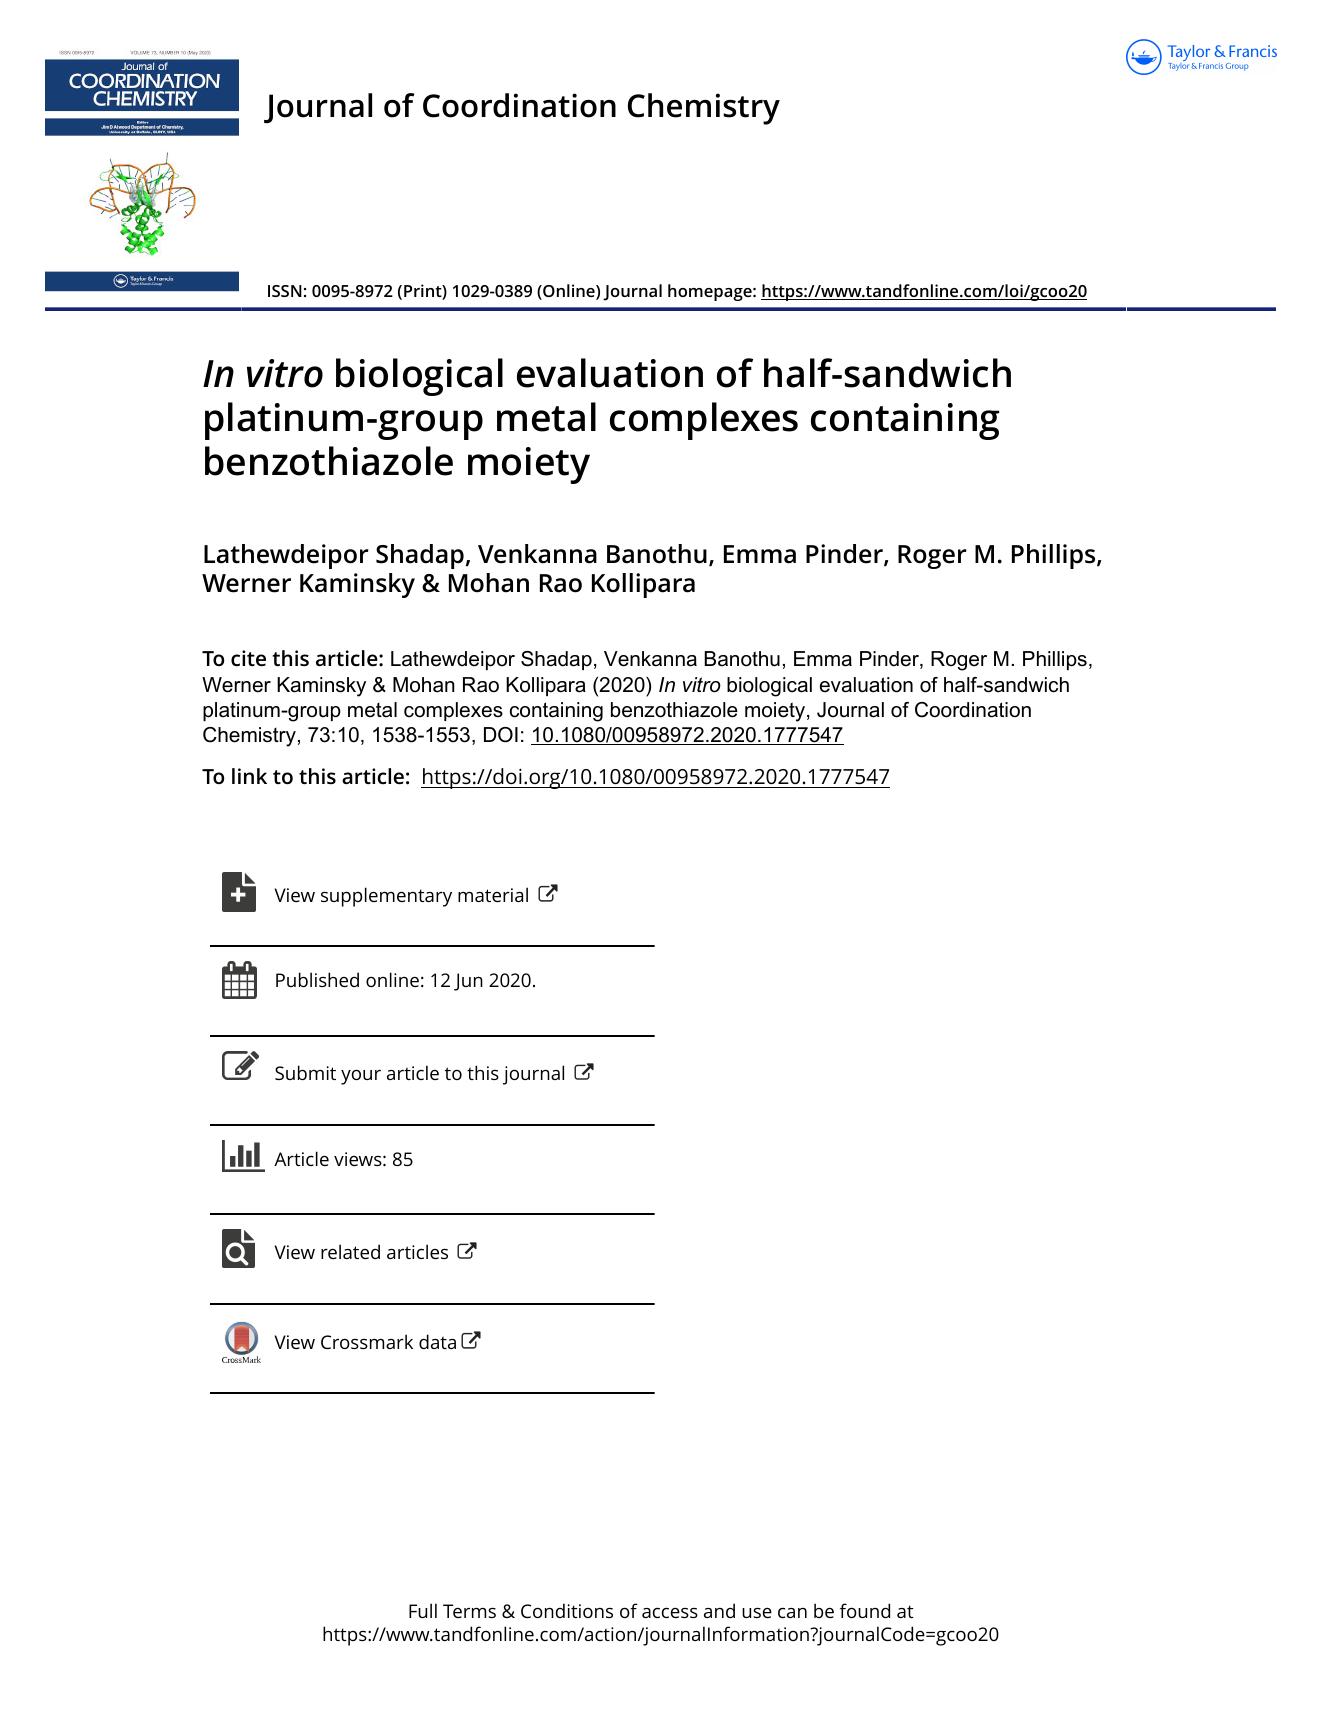 In vitro biological evaluation of half-sandwich platinum-group metal complexes containing benzothiazole moiety by unknow